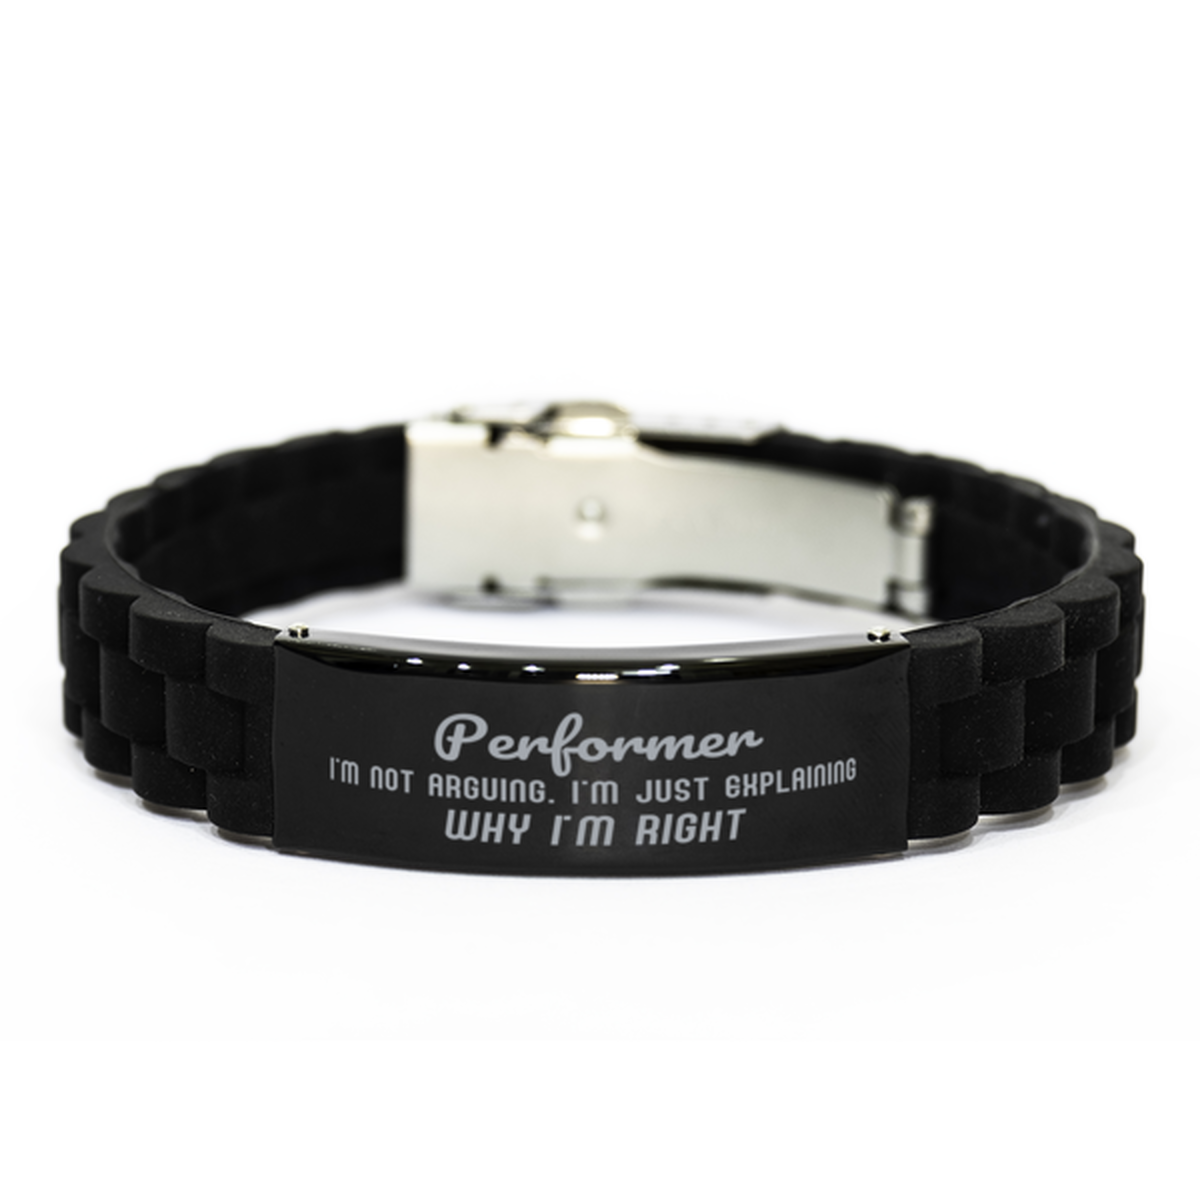 Performer I'm not Arguing. I'm Just Explaining Why I'm RIGHT Black Glidelock Clasp Bracelet, Funny Saying Quote Performer Gifts For Performer Graduation Birthday Christmas Gifts for Men Women Coworker